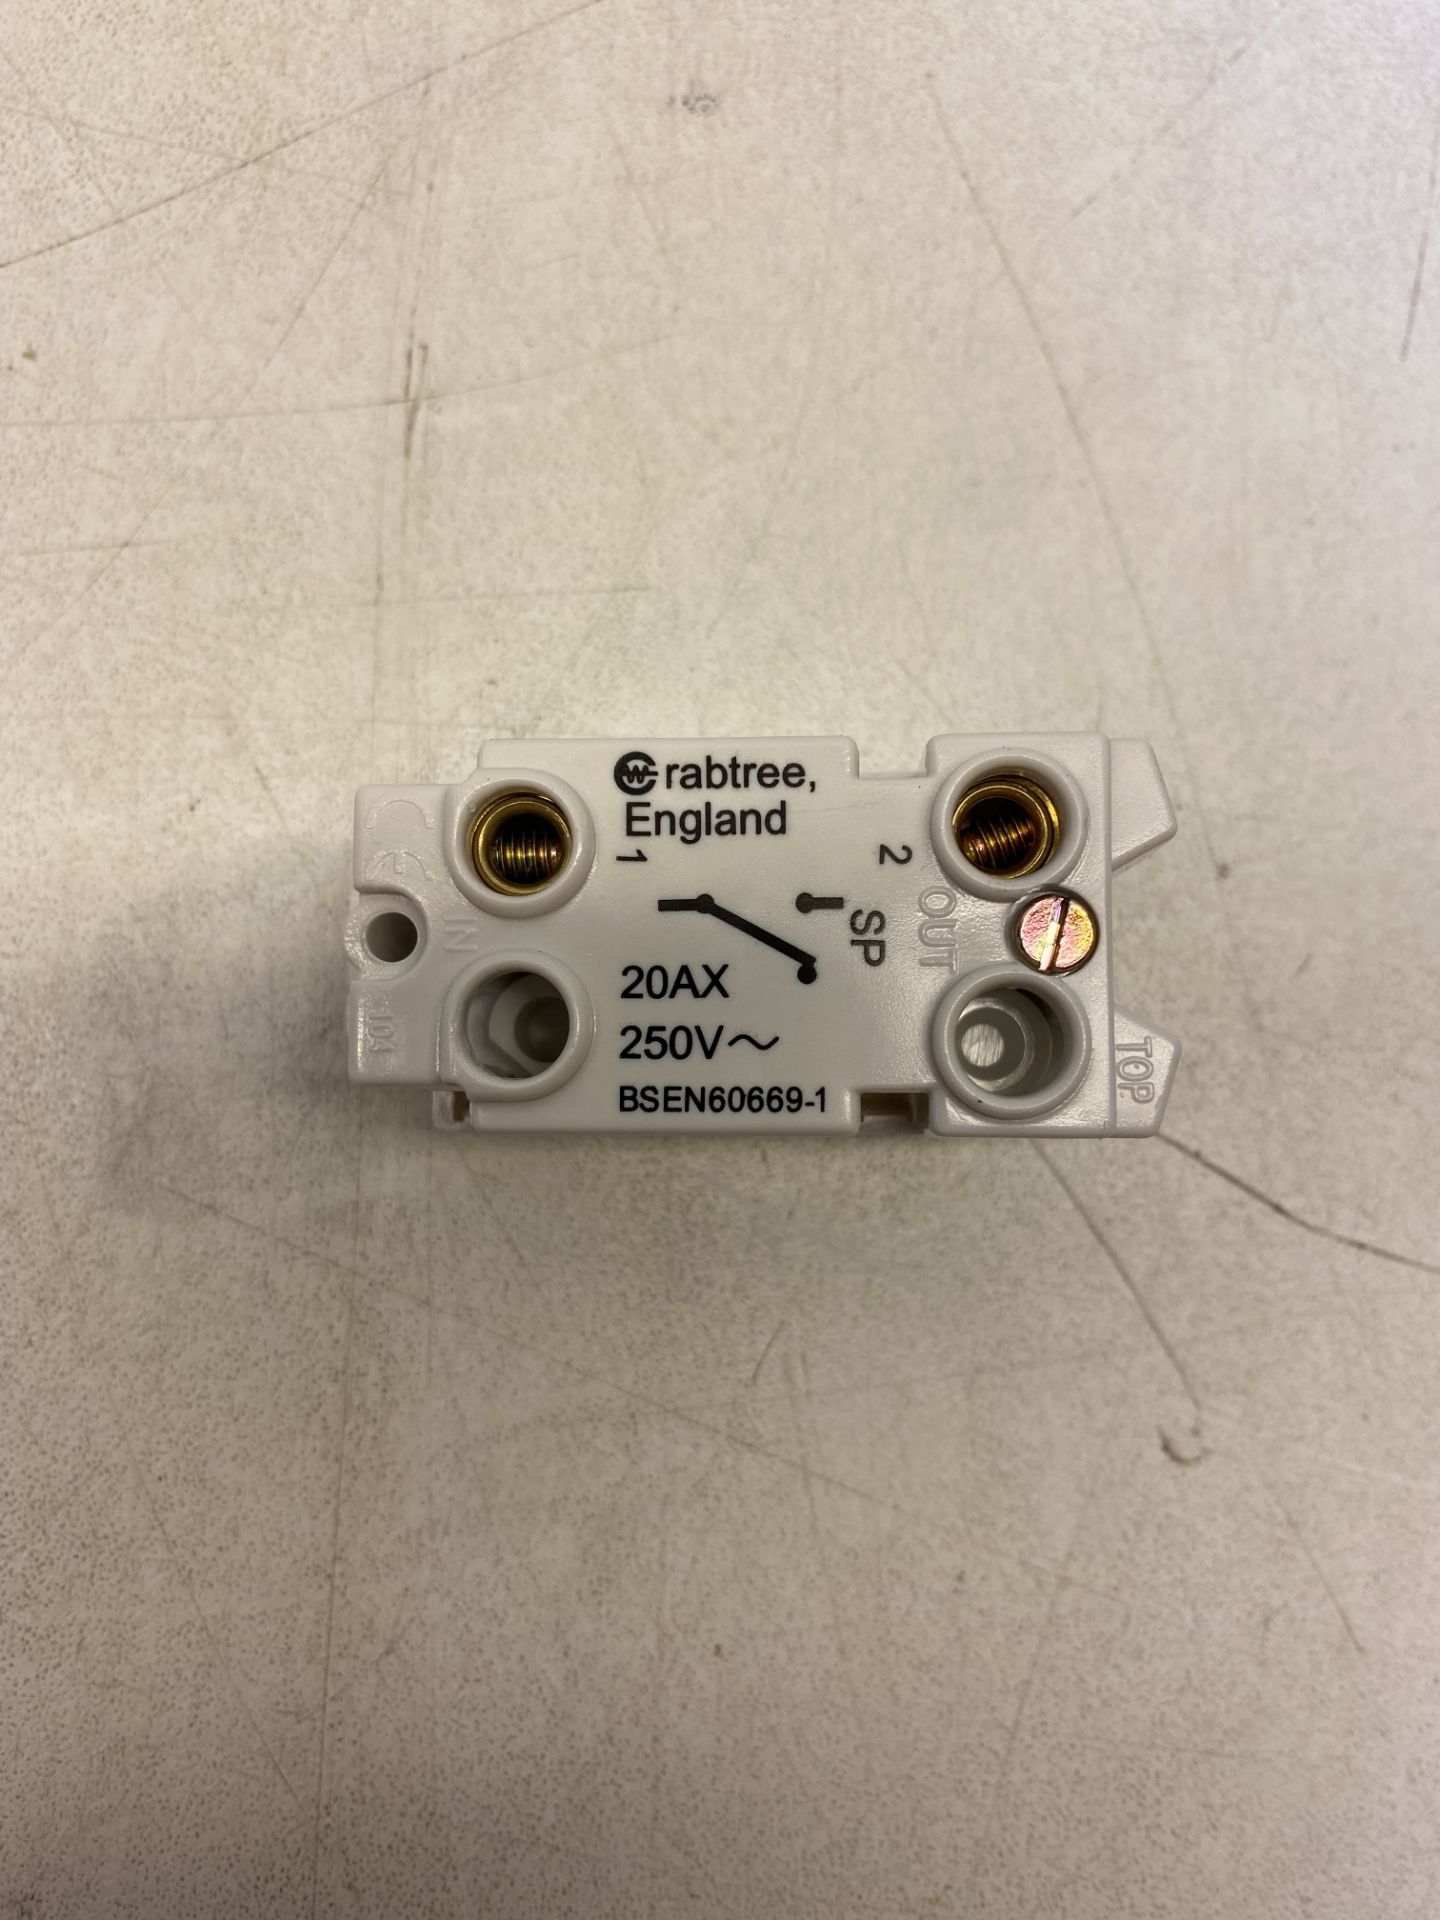 100 x Rockergrid AM4450 Anti Microbial 20AX 1 way Switches - Image 3 of 4